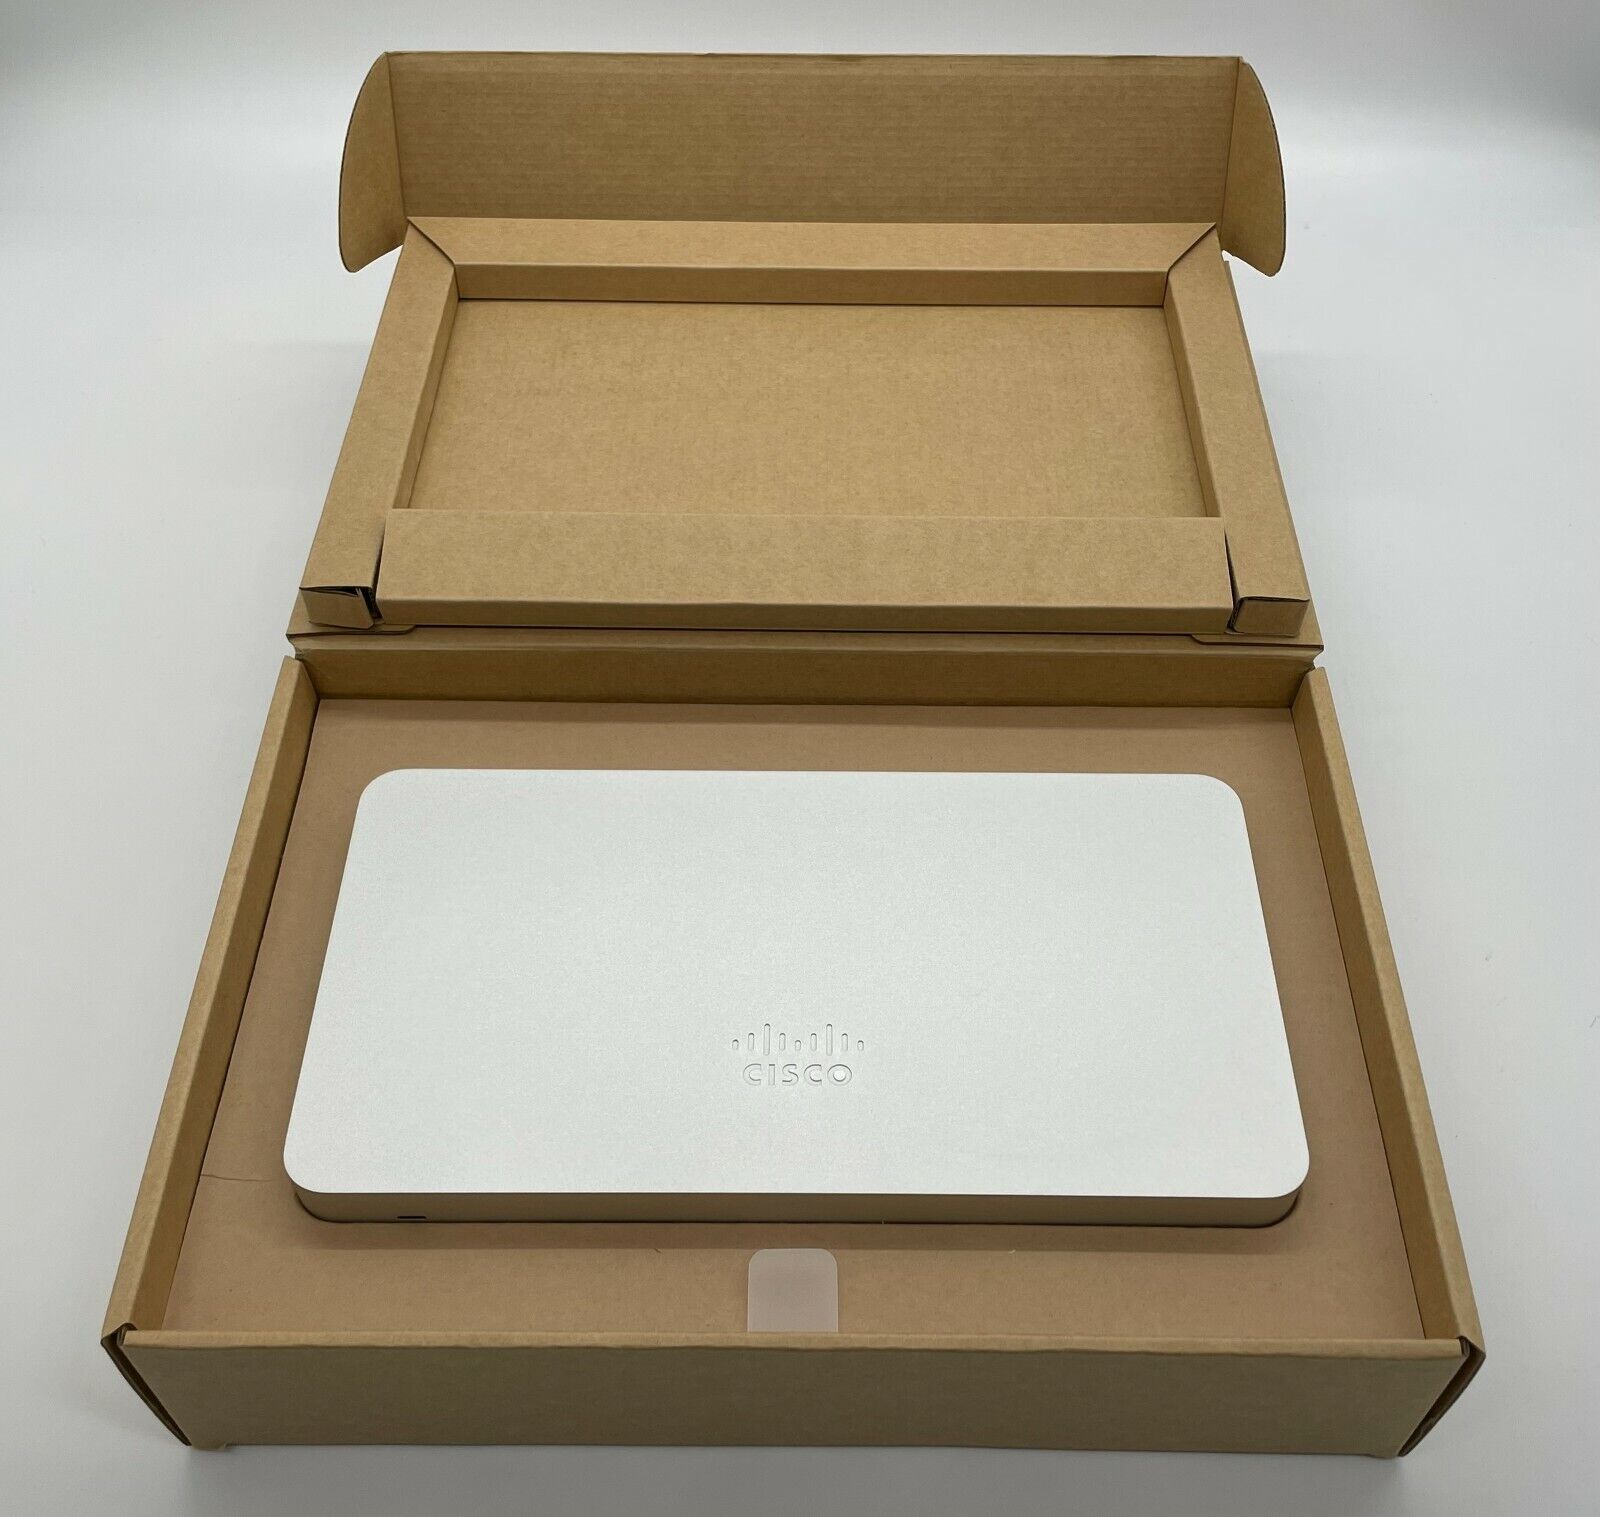 Cisco Meraki MX68-HW Cloud Managed Router Security Firewall Appliance UNCLAIMED